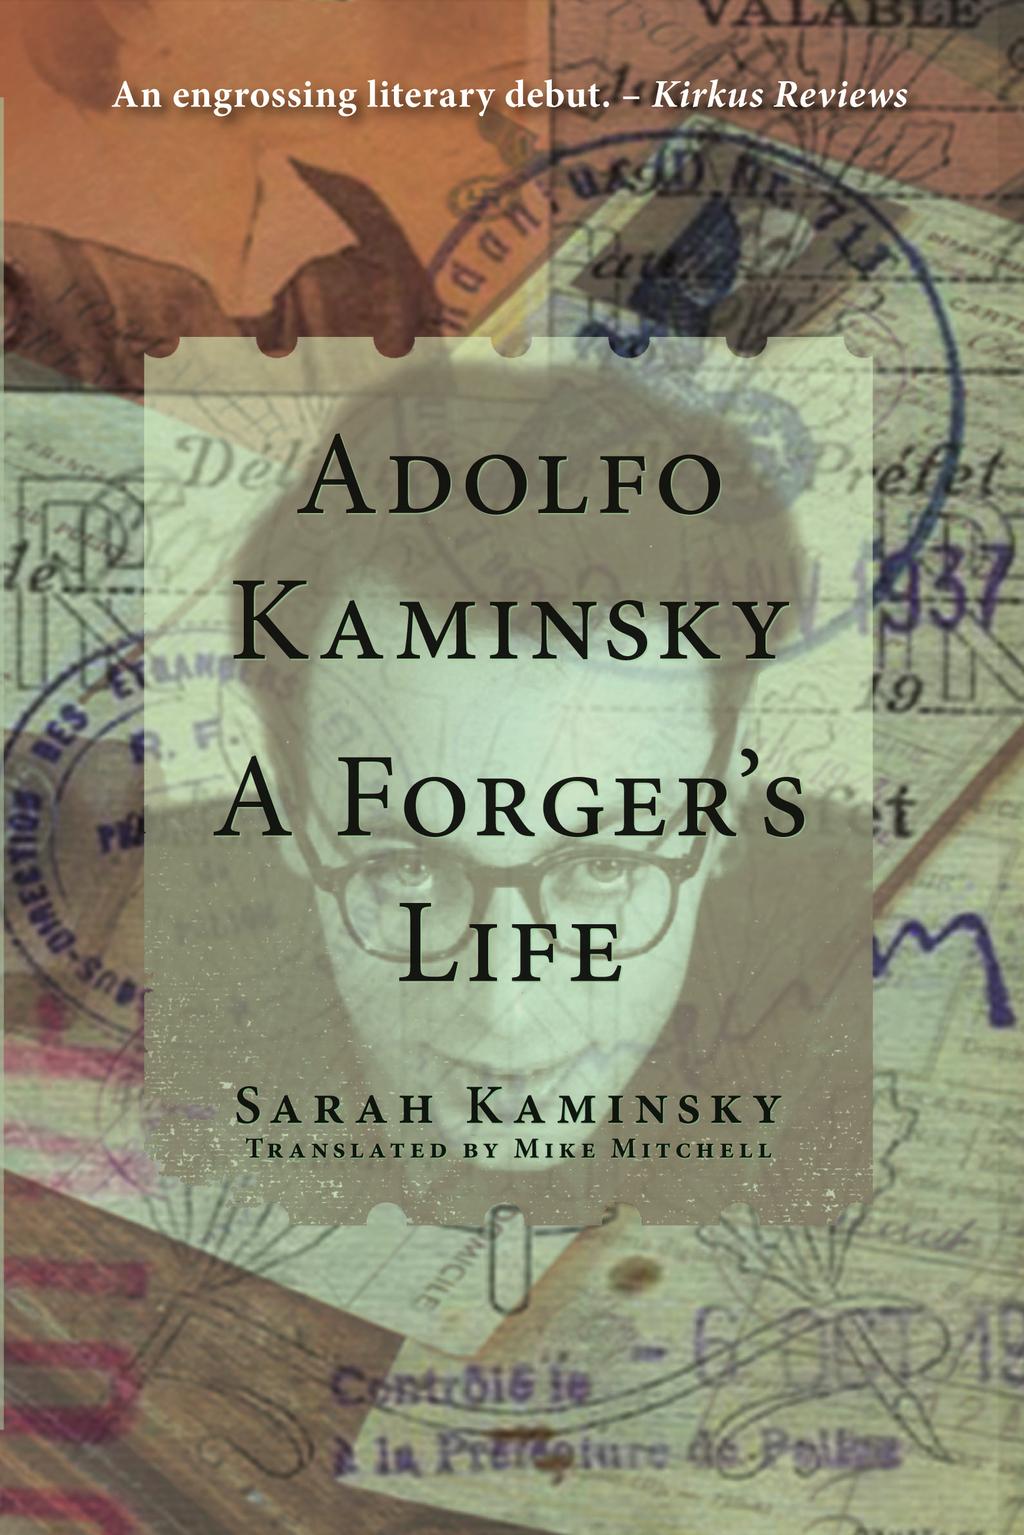 Reading Group Guide Adolfo Kaminsky, A Forger's Life By Sarah Kaminsky Introduction Best-selling author Sarah Kaminsky takes readers through her father Adolfo Kaminsky s perilous and clandestine